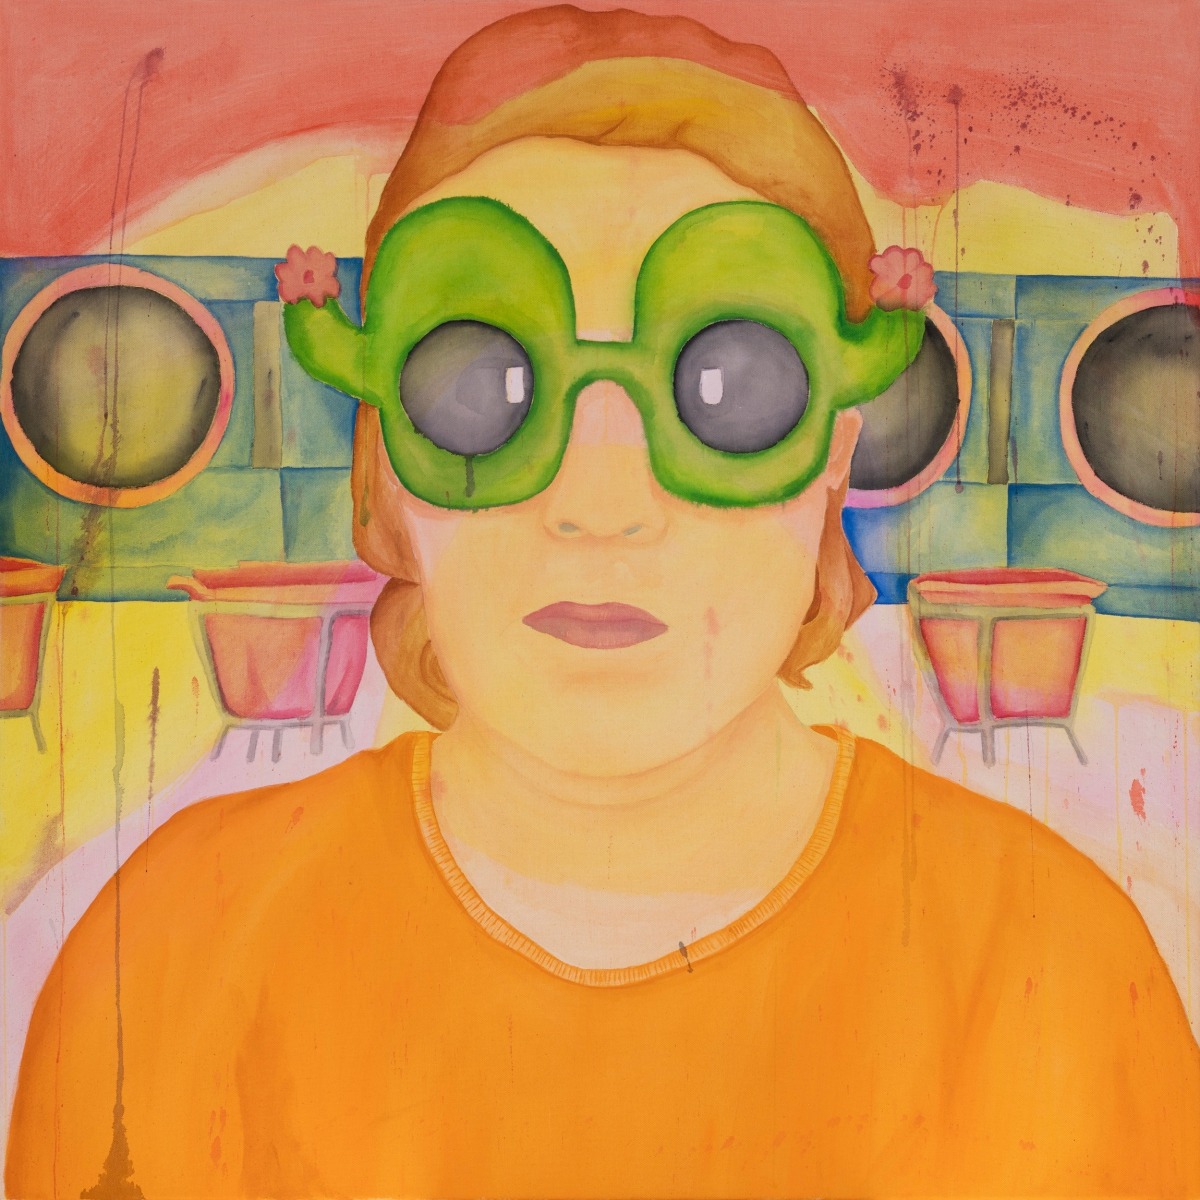 Karla Diaz, Self Portrait with Cactus Glasses, 2022, Acrylic on canvas, 40 x 40 in.